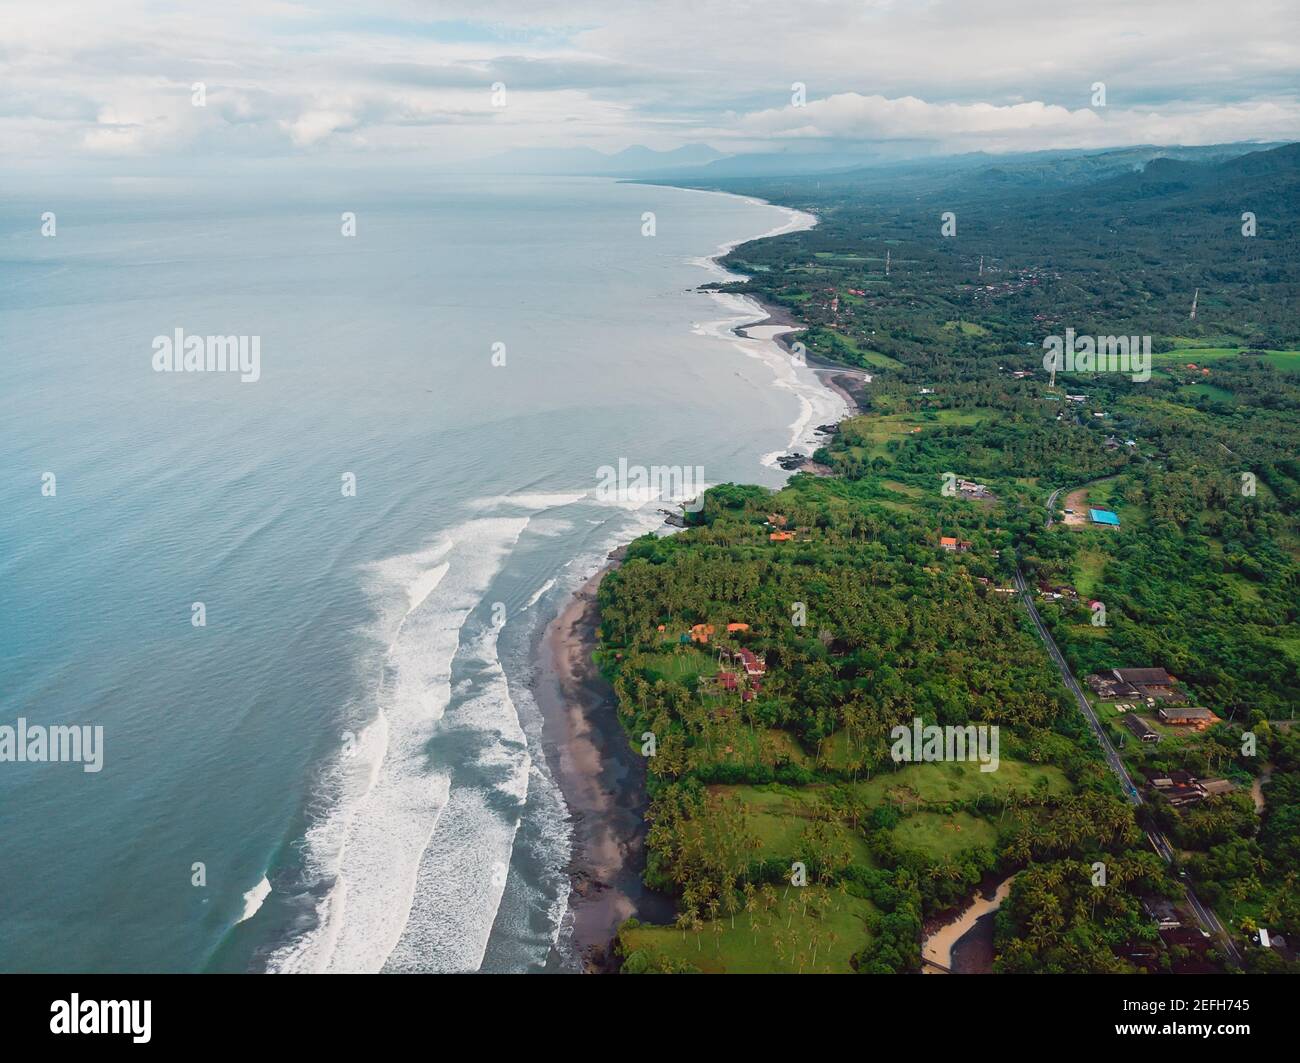 Aerial view of coastline with black sand beaches and waves in Balian, Bali Stock Photo